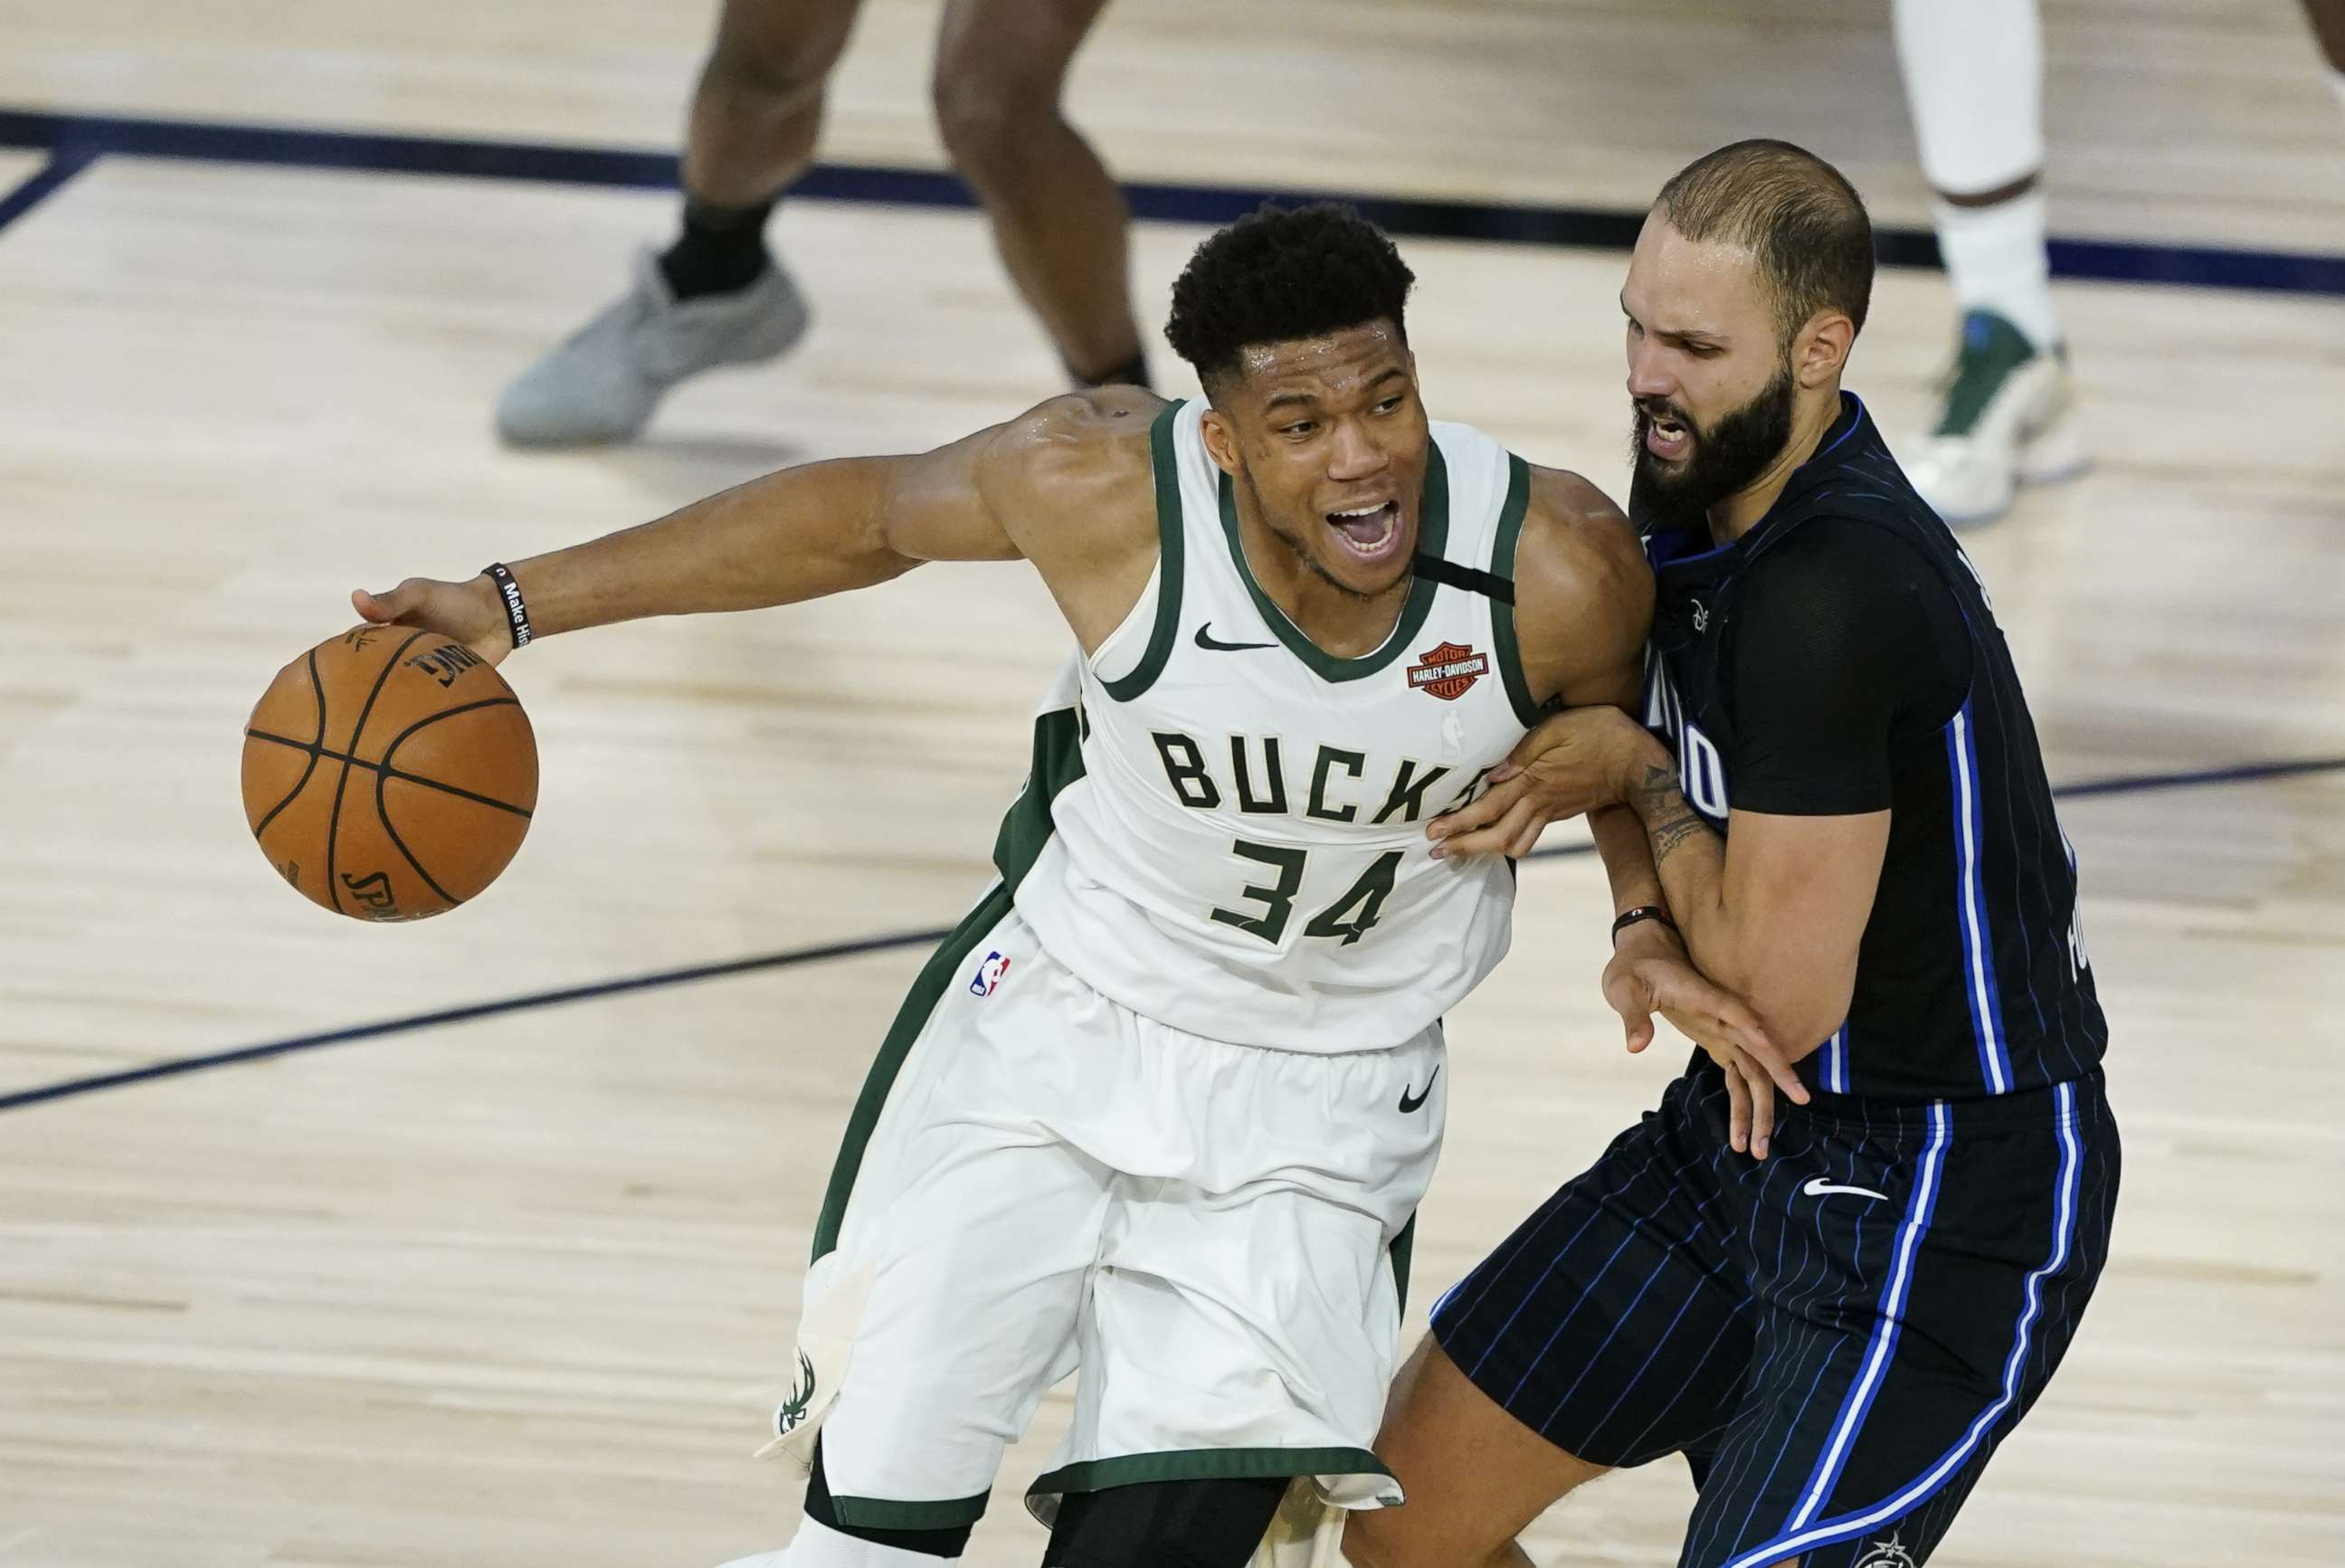 PHOTO: Giannis Antetokounmpo of the Milwaukee Bucks drives past Evan Fournier of the Orlando Magic during the second half of an NBA basketball first round playoff game on Aug. 24, 2020 in Lake Buena Vista, Fla.